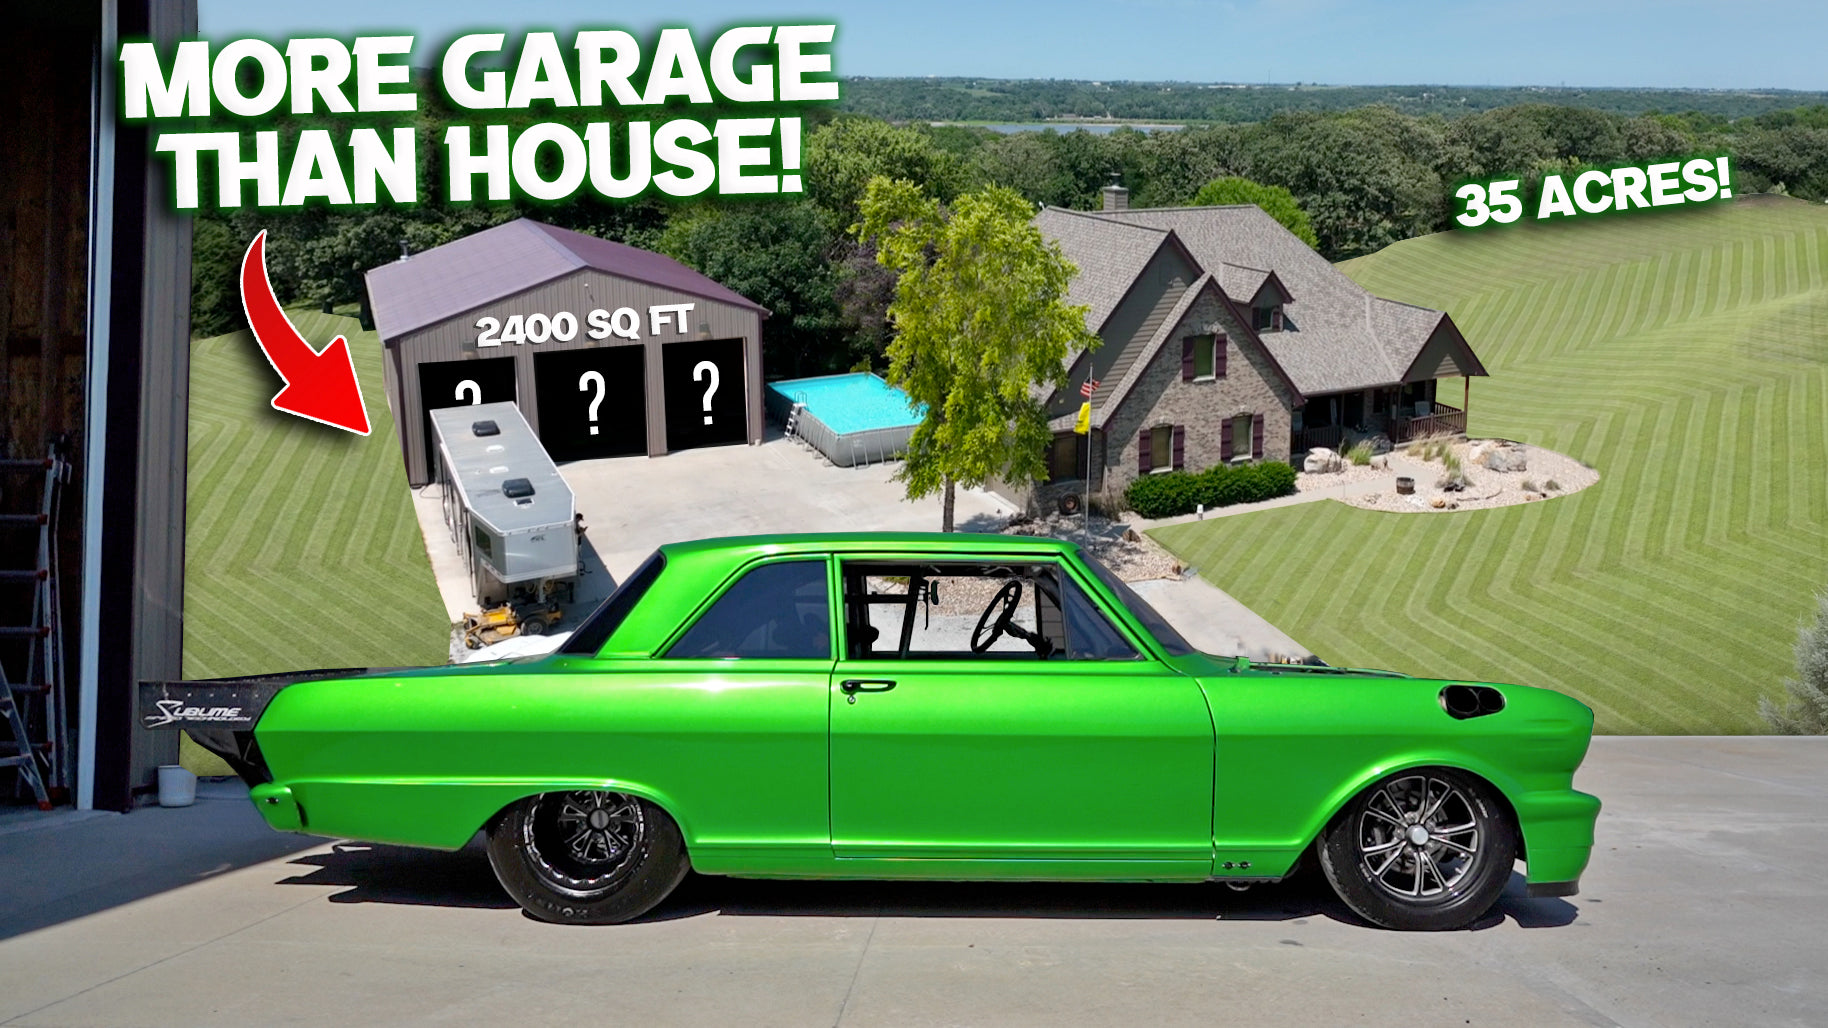 Car Enthusiast Dream Property..More Garage than House! (1320Garages | Ep. 2)